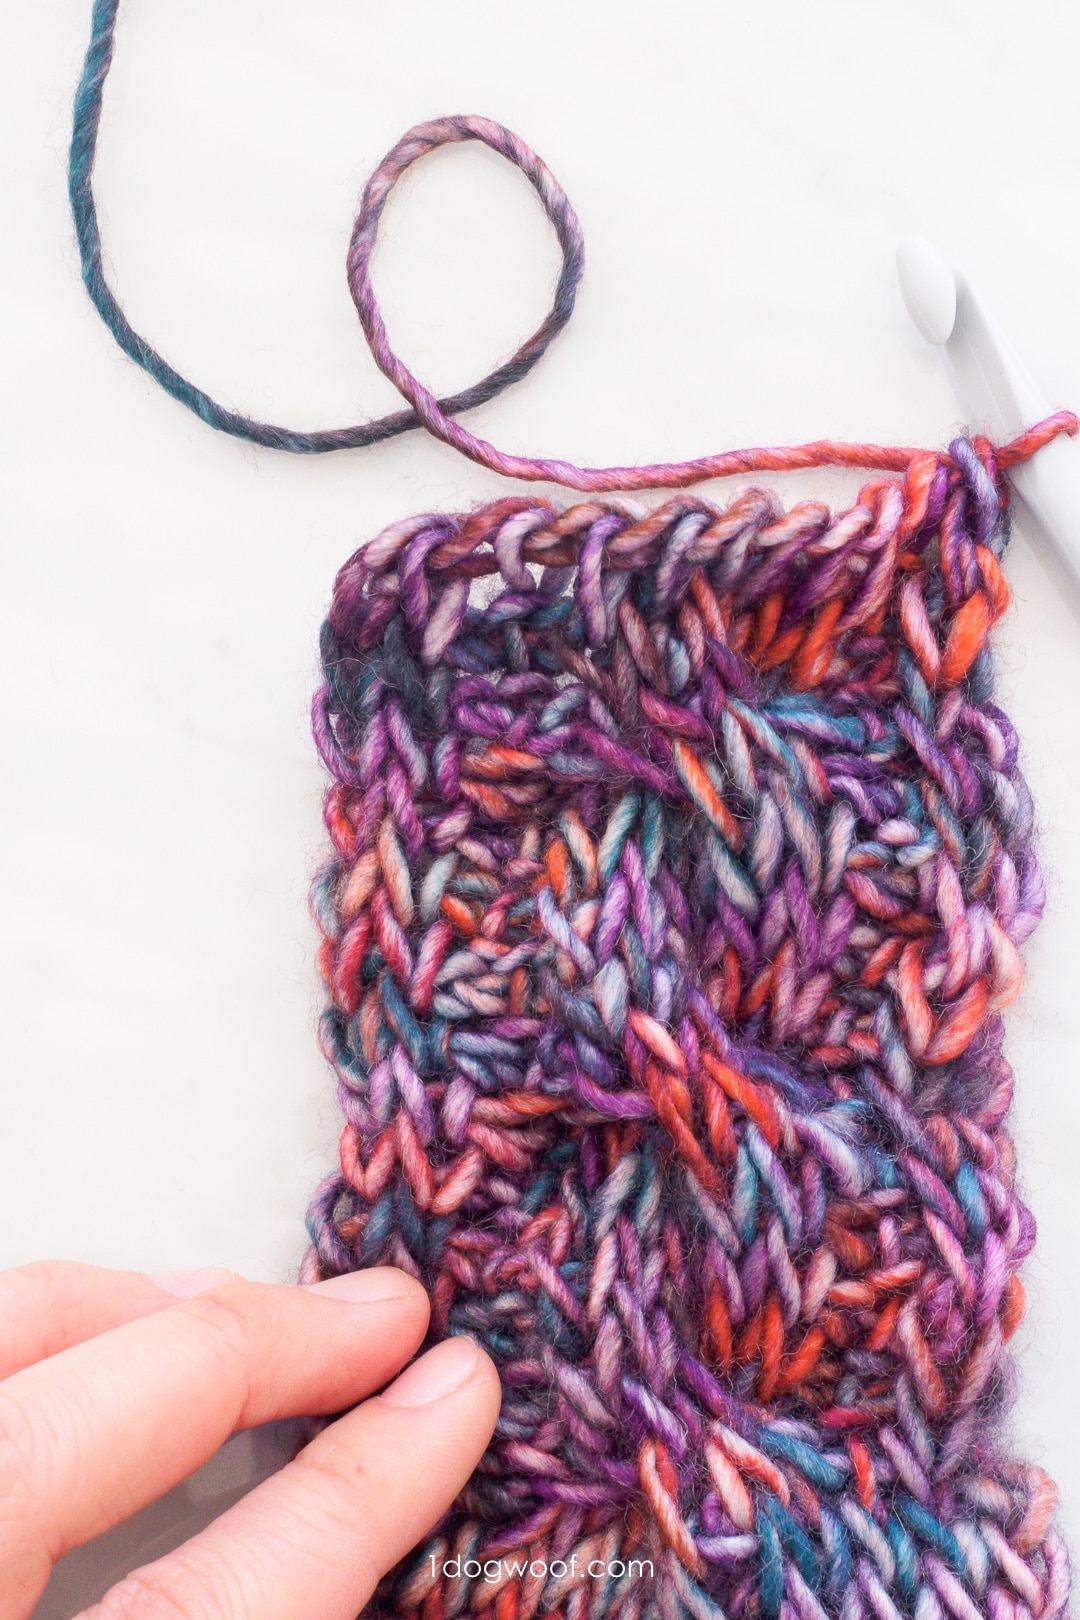 tunisian crochet cables with hand-dyed yarn